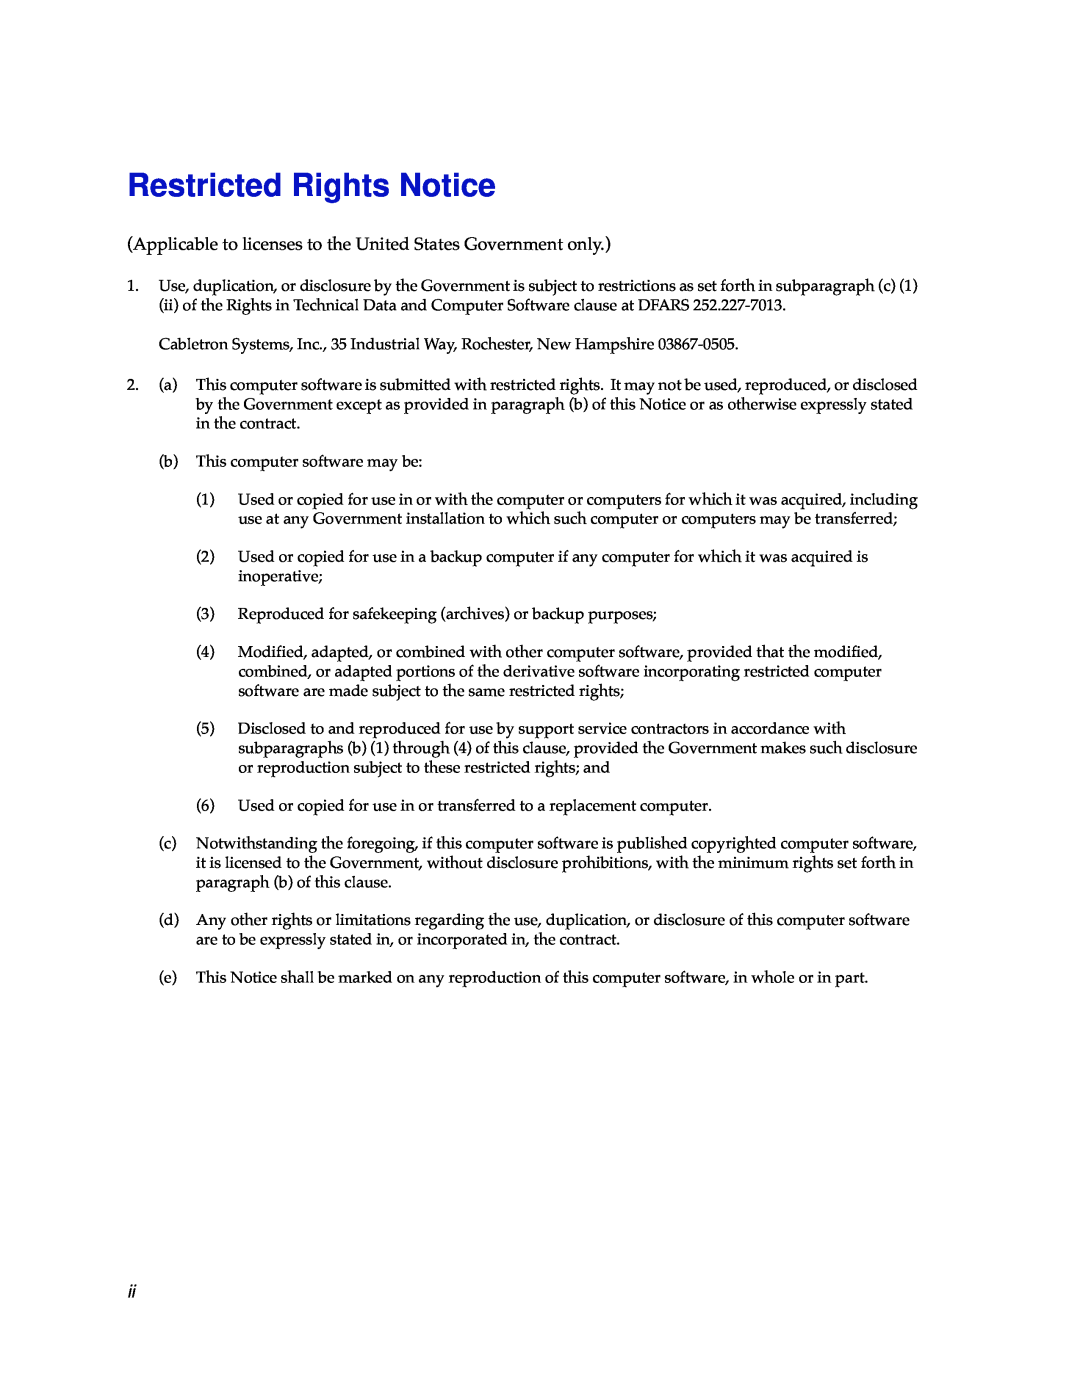 Cabletron Systems SEHI-32/34 manual Restricted Rights Notice, Applicable to licenses to the United States Government only 